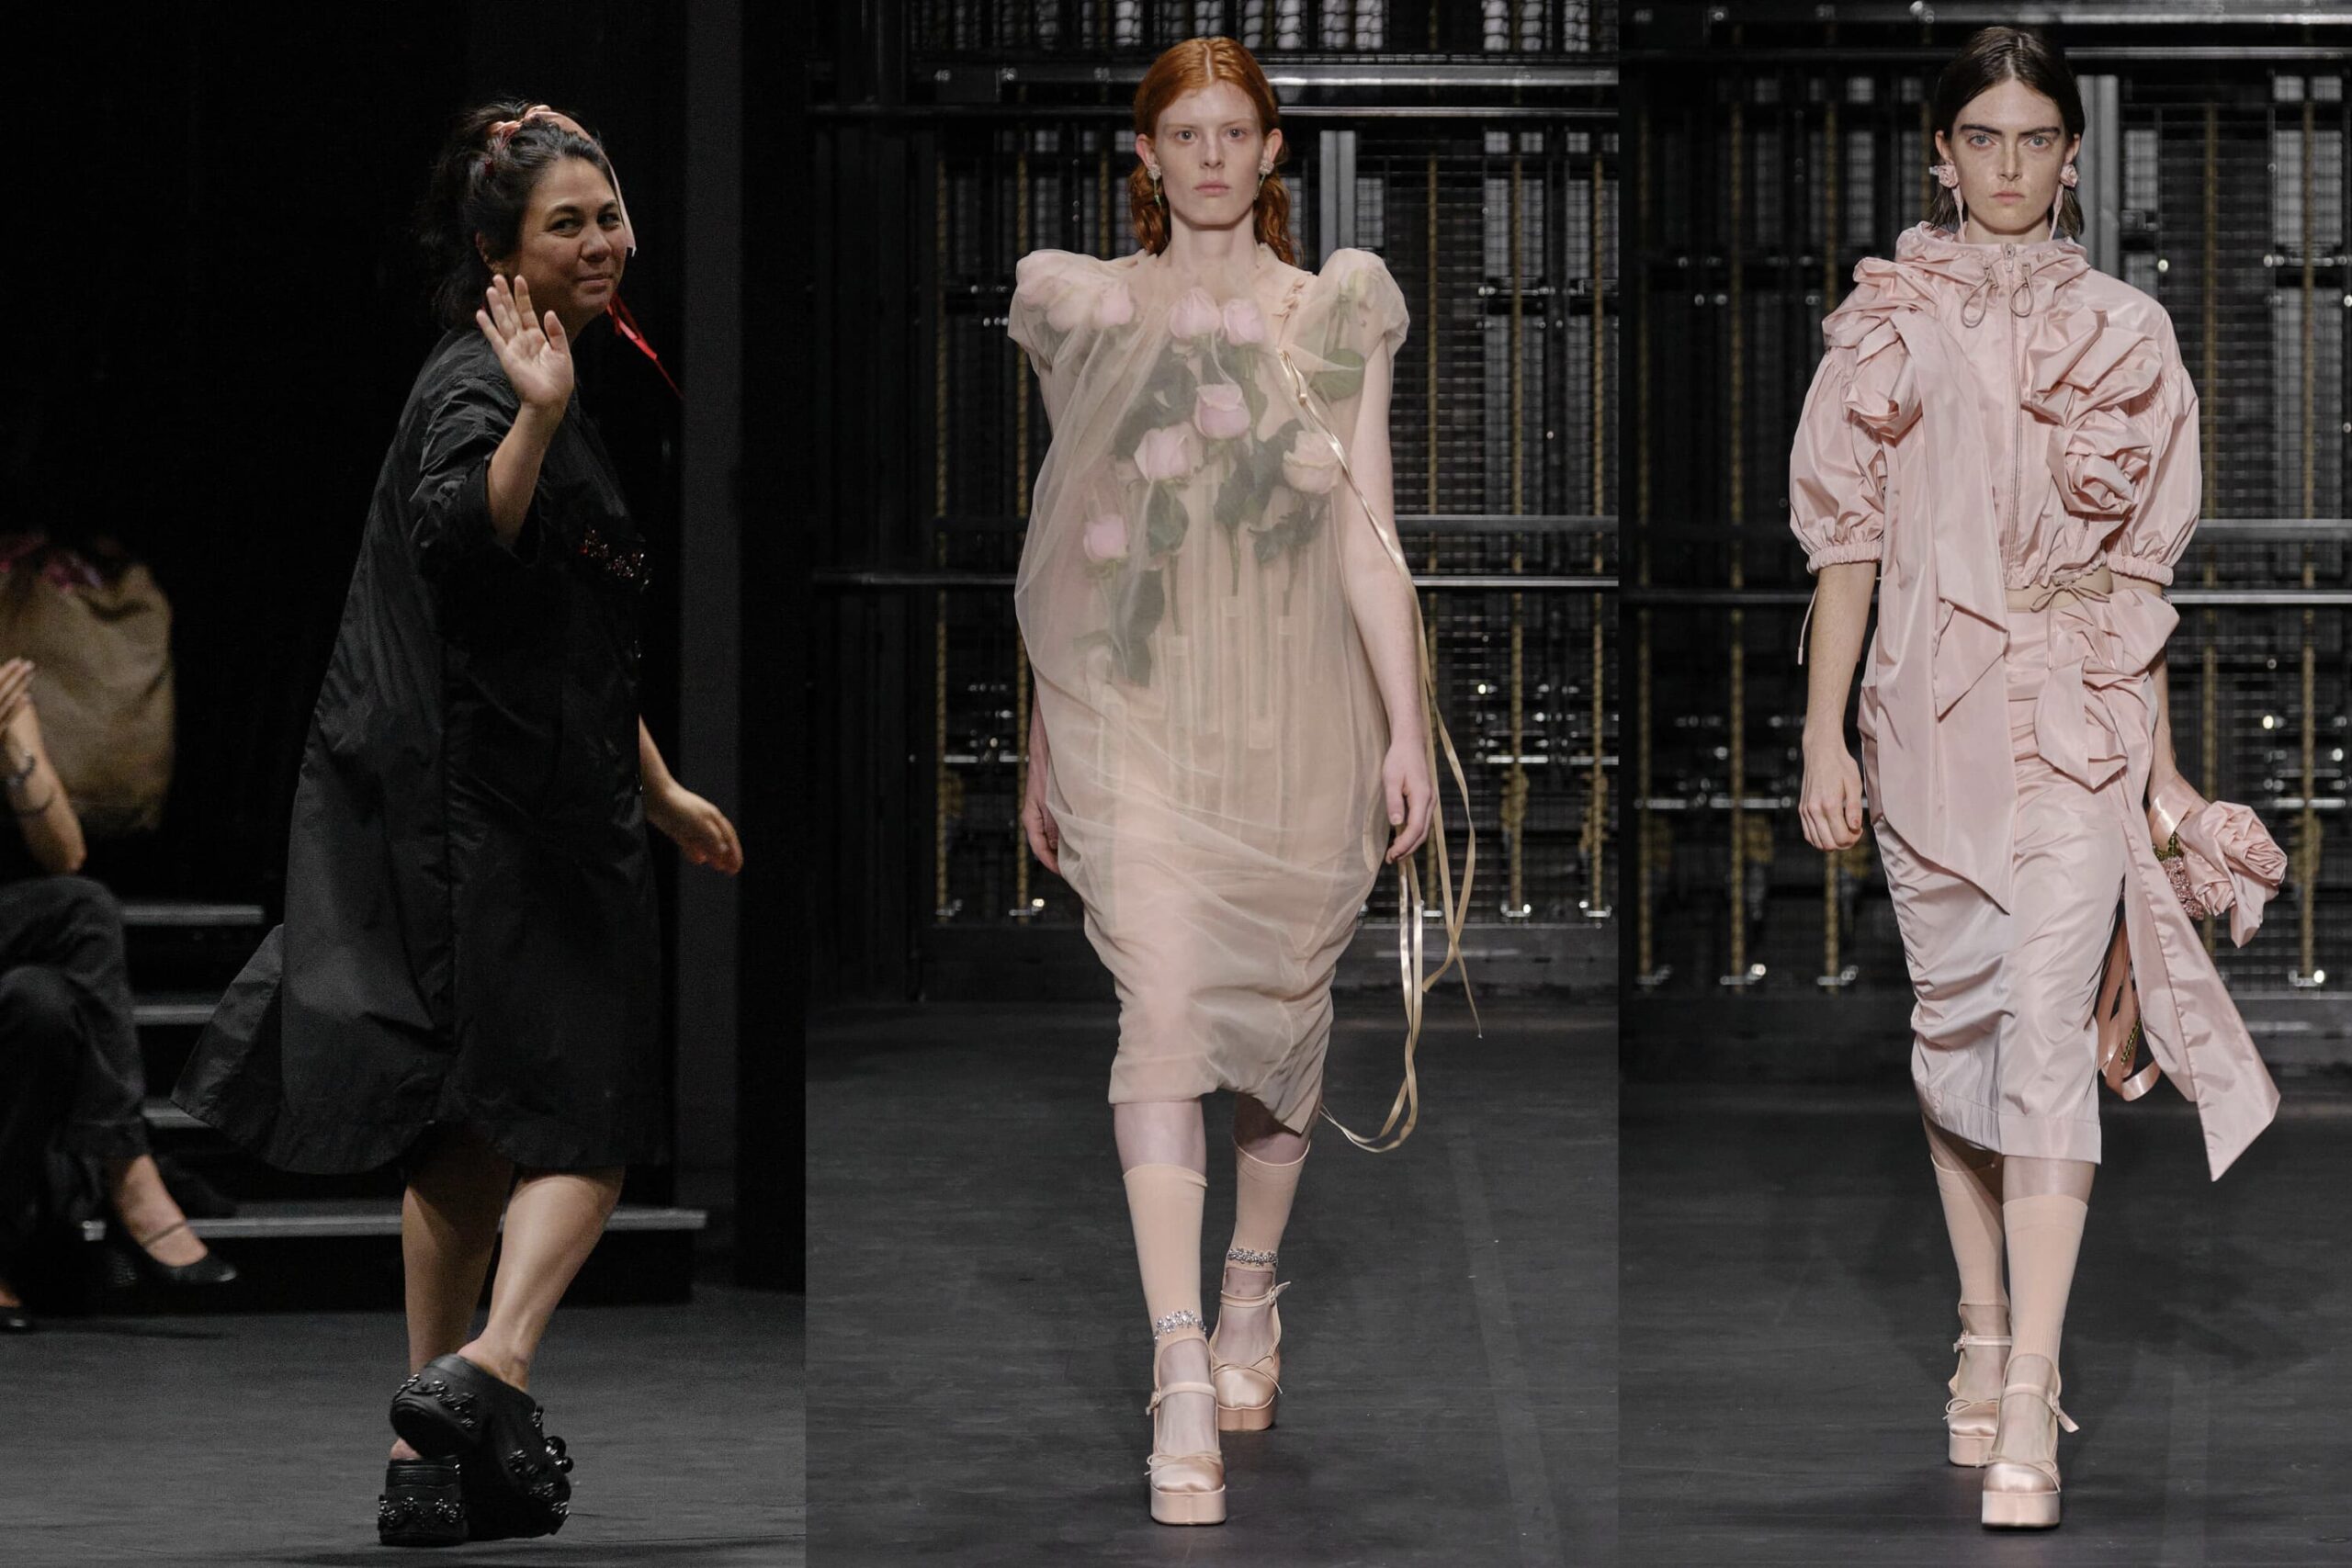 Simone Rocha and Jean Paul Gaultier: An Exciting Couture Collaboration